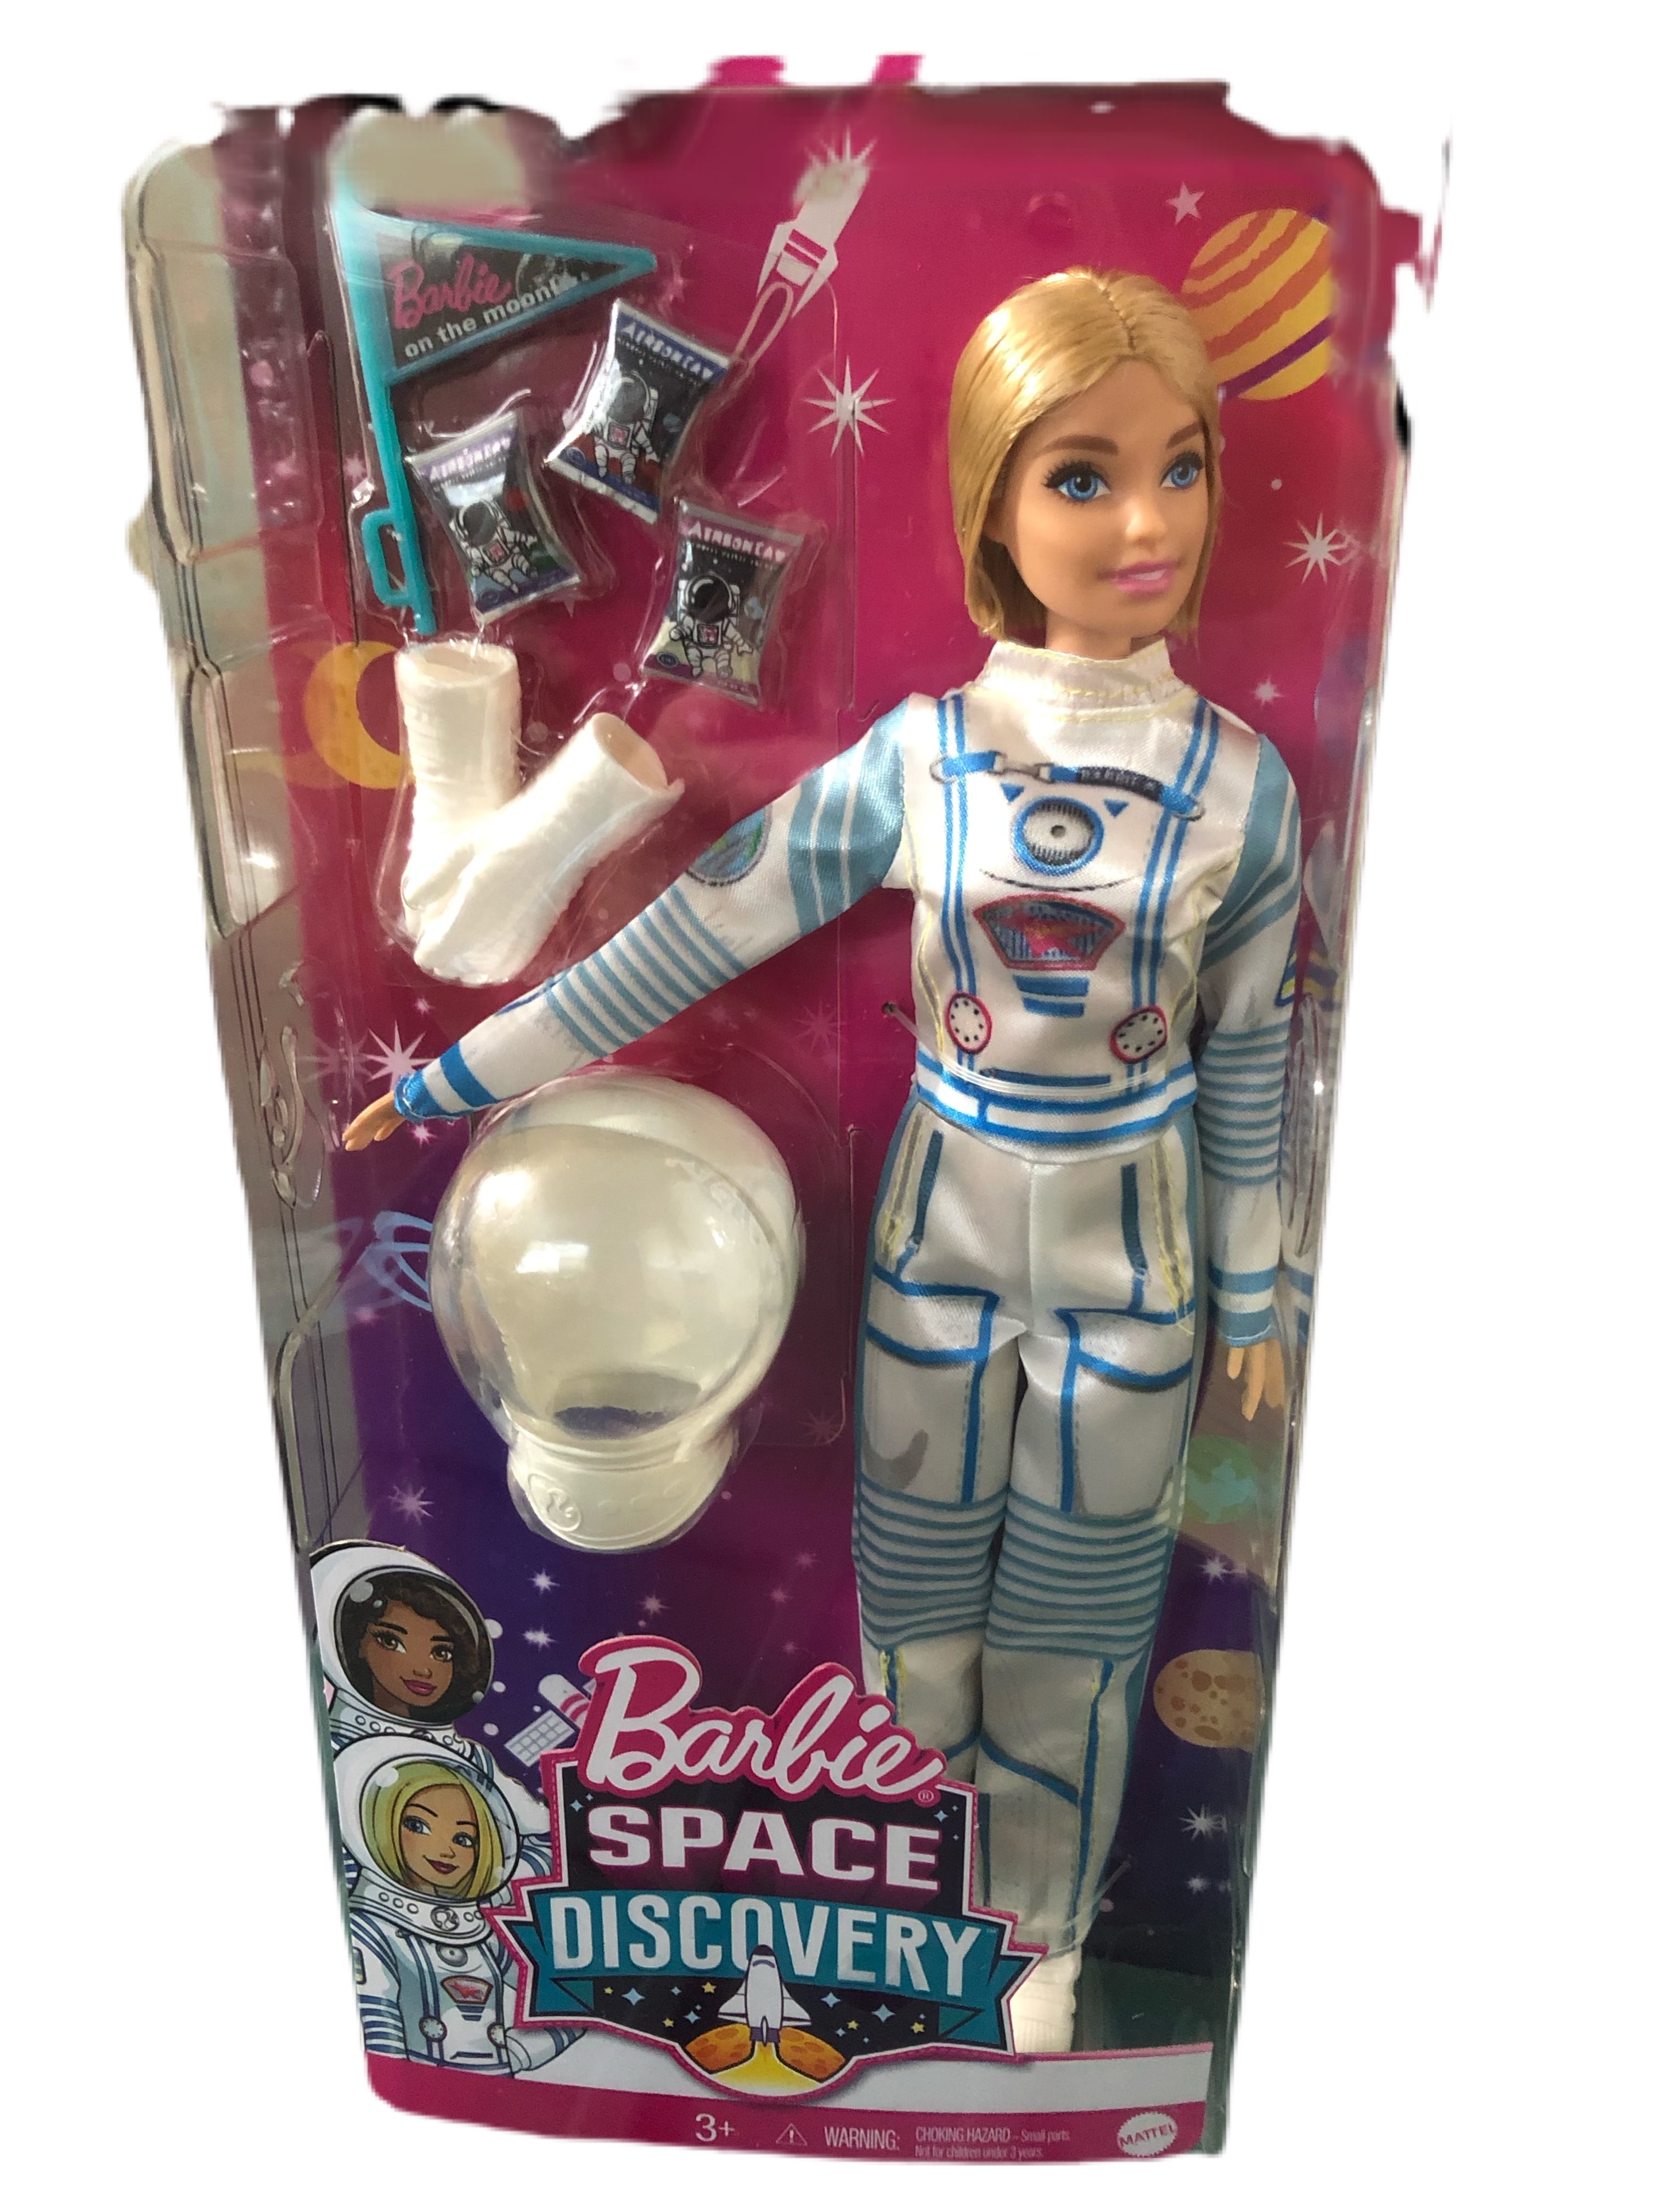 Barbie Careers Astronaut and Space Scientist Doll 2pk for sale online